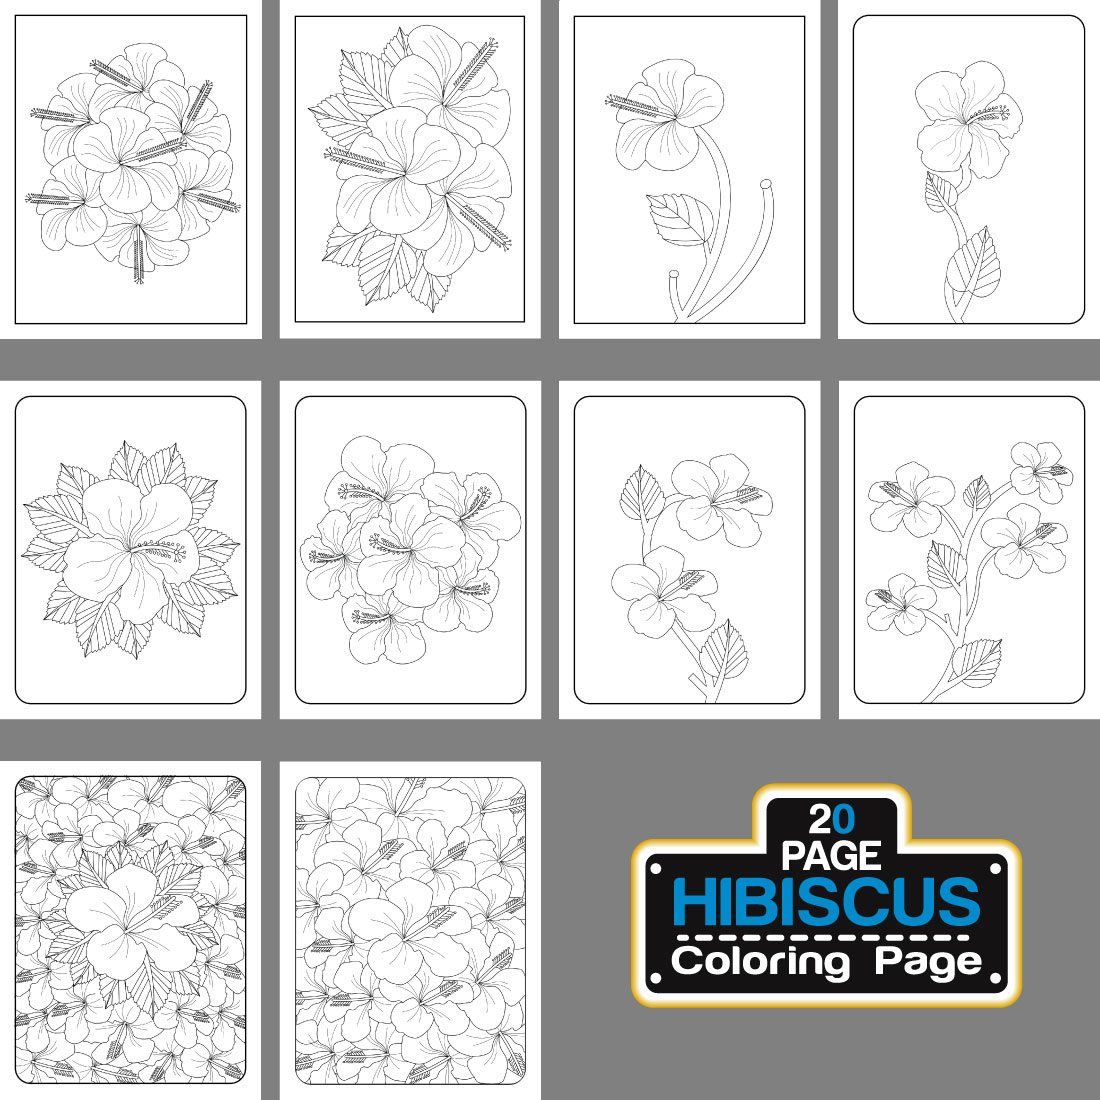 Hibiscus Flower Coloring Page And Book preview image.